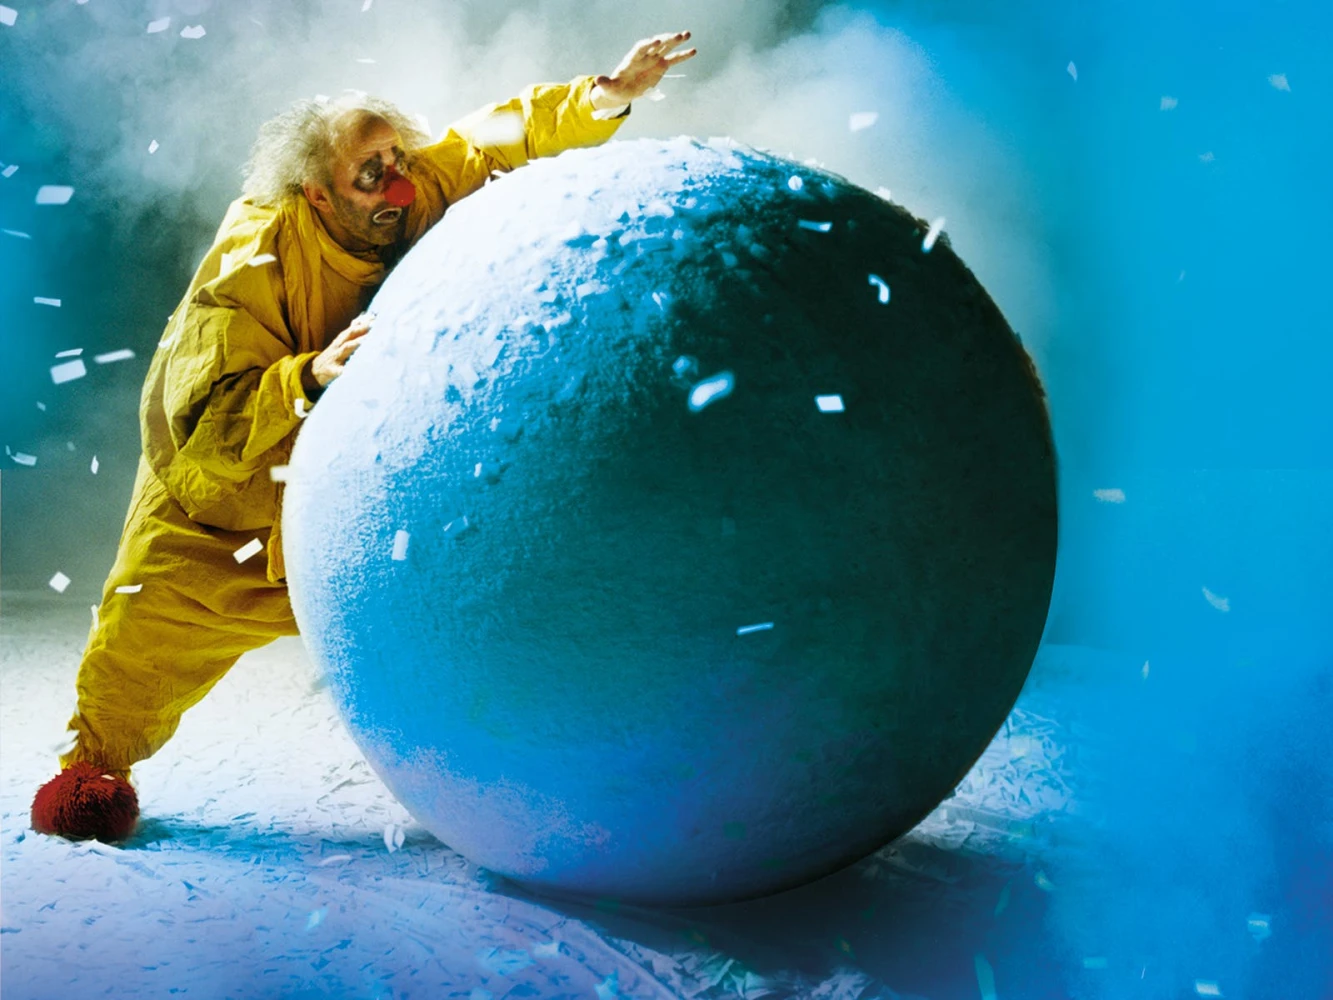 Slava's Snowshow: What to expect - 4